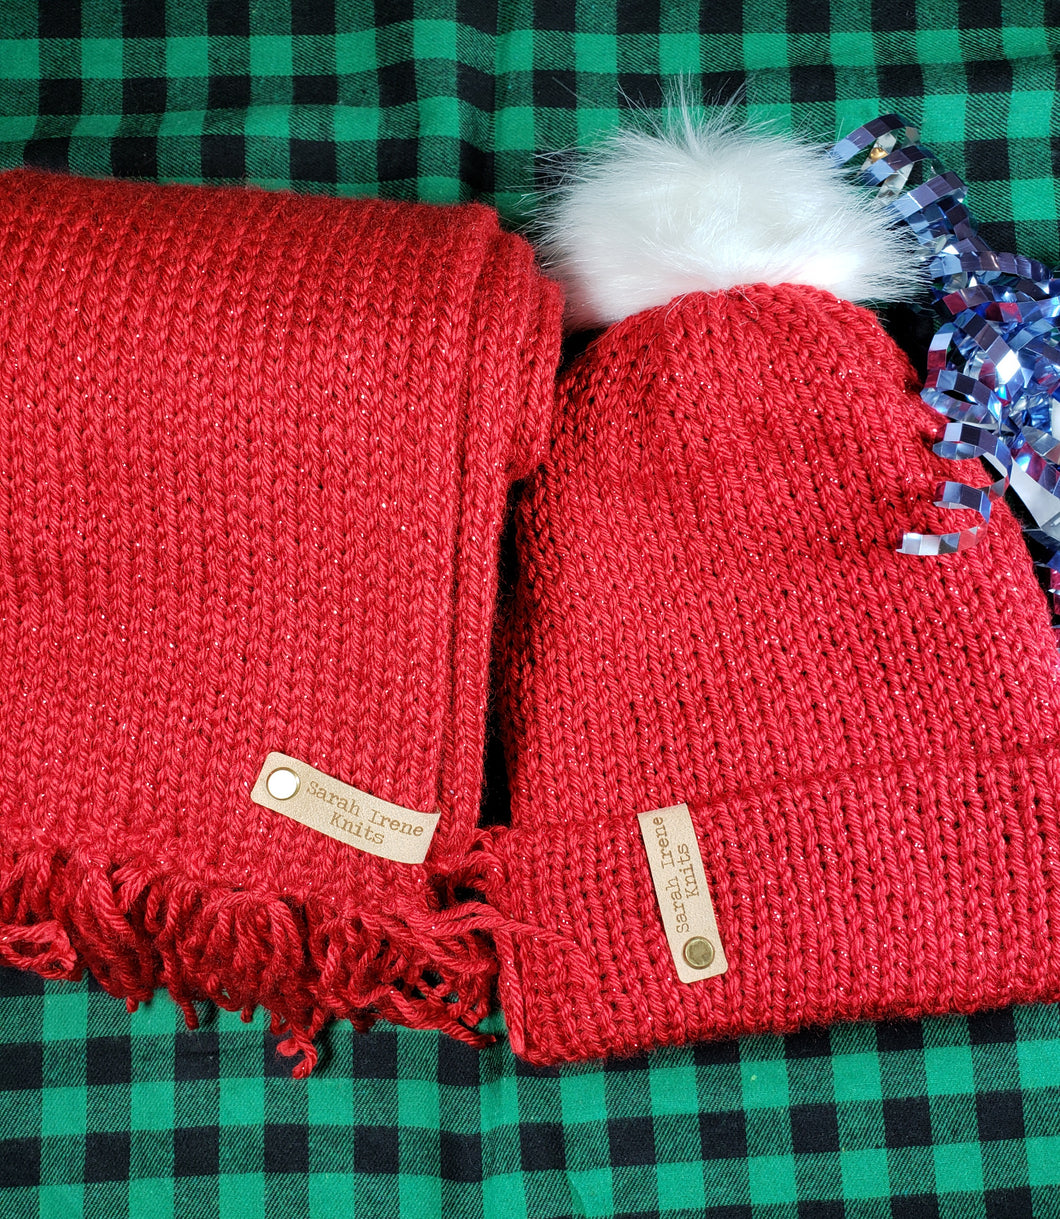 Gift set of sparkling red beanie and matching scarf. Beanie is topped with a white faux fur pom.